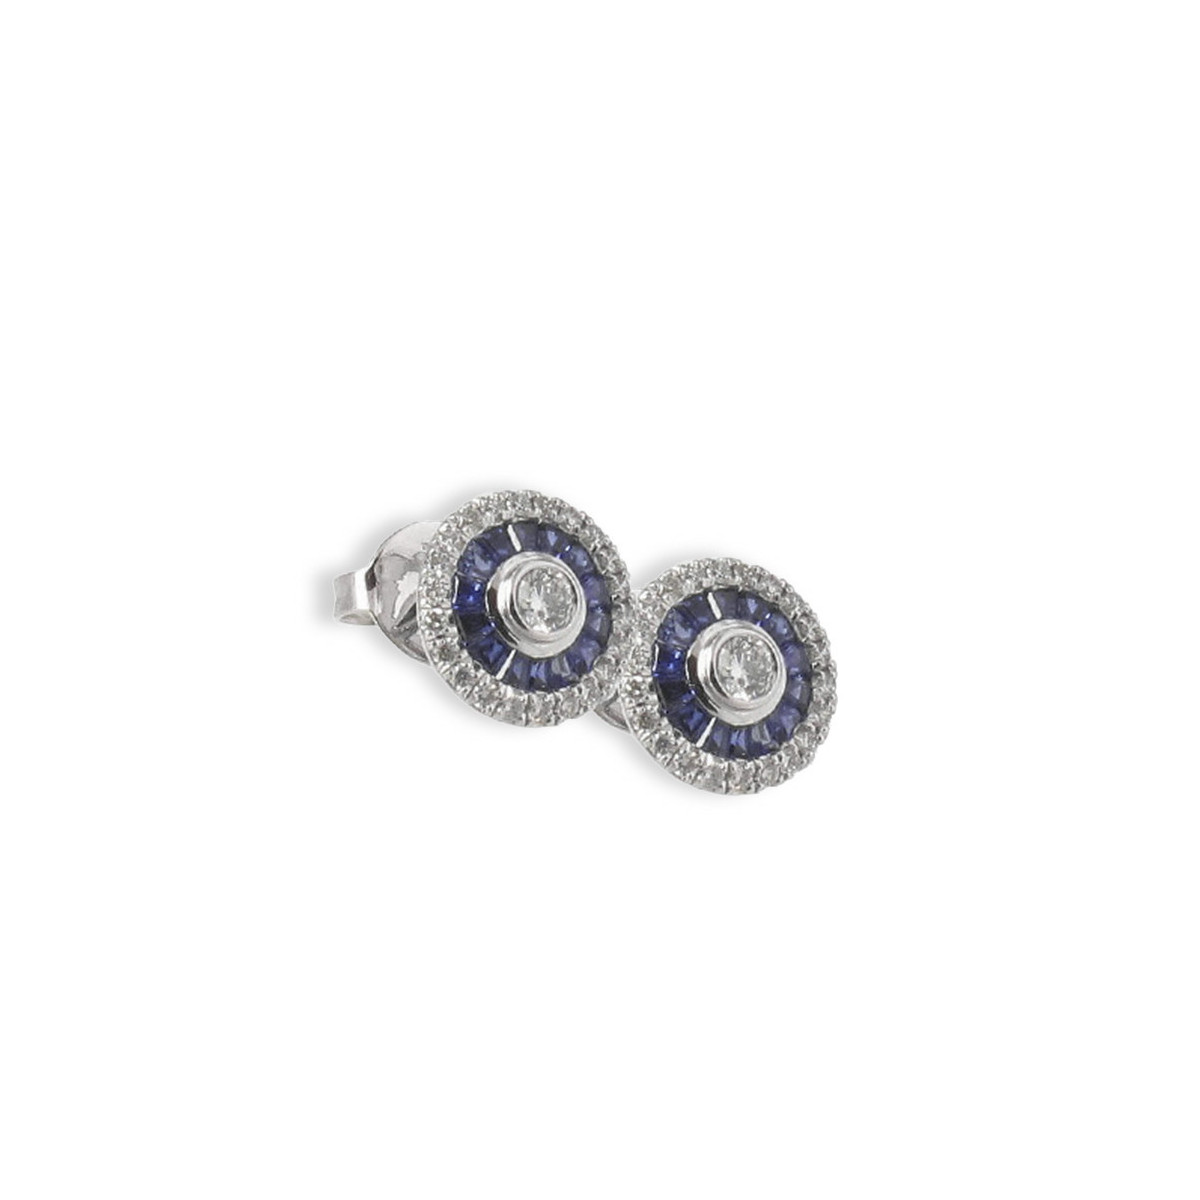 GOLD DIAMONDS AND SAPPHIRES EARRINGS